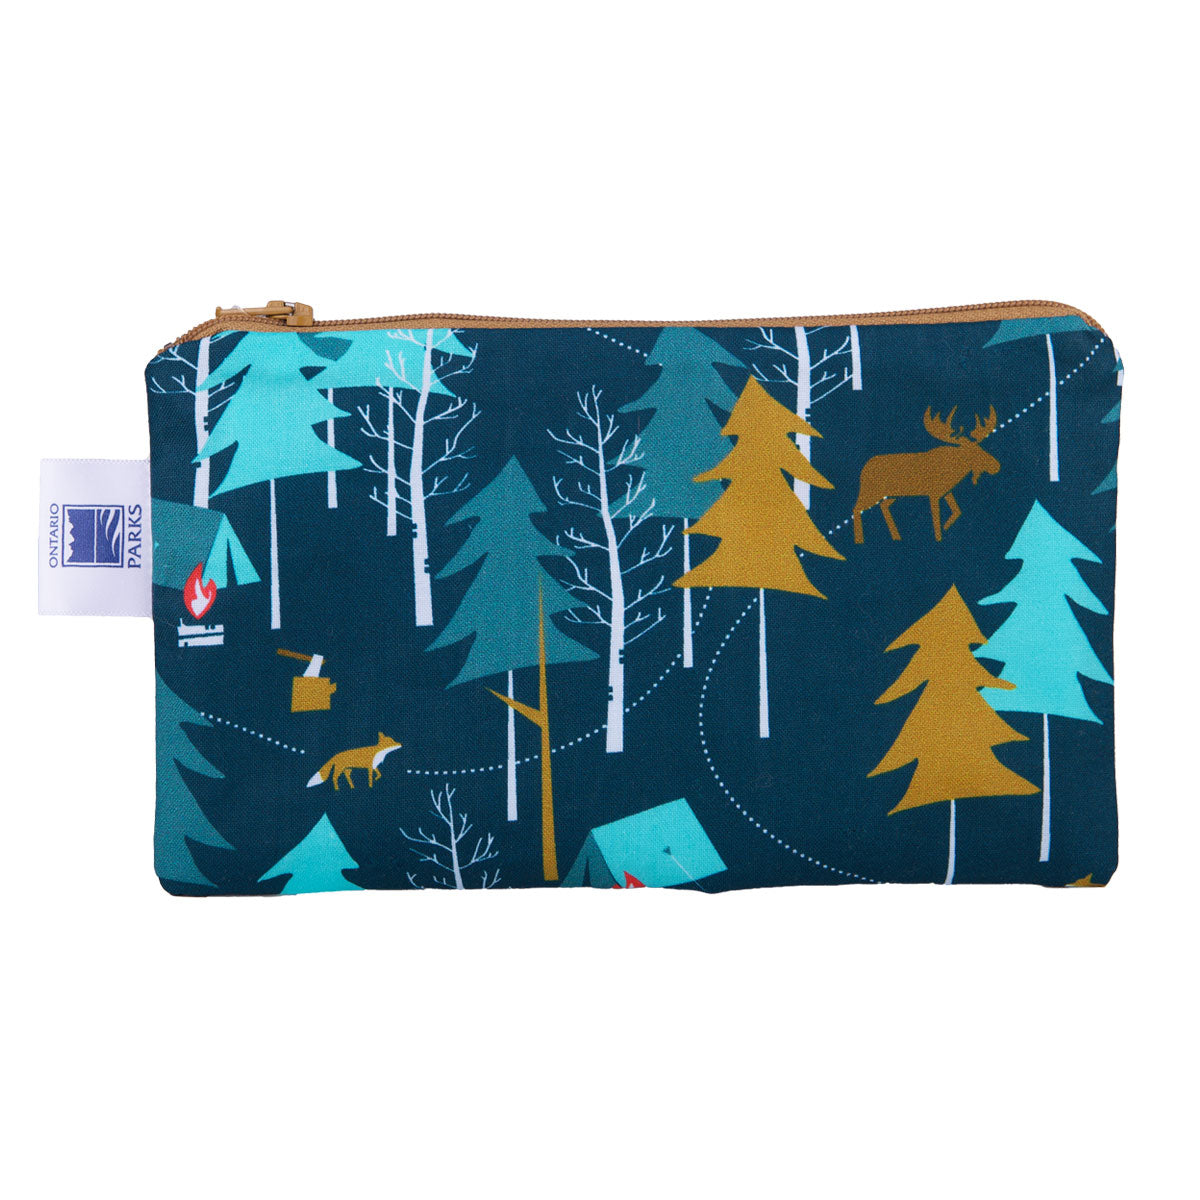 Camp bag shows print of trees and animals